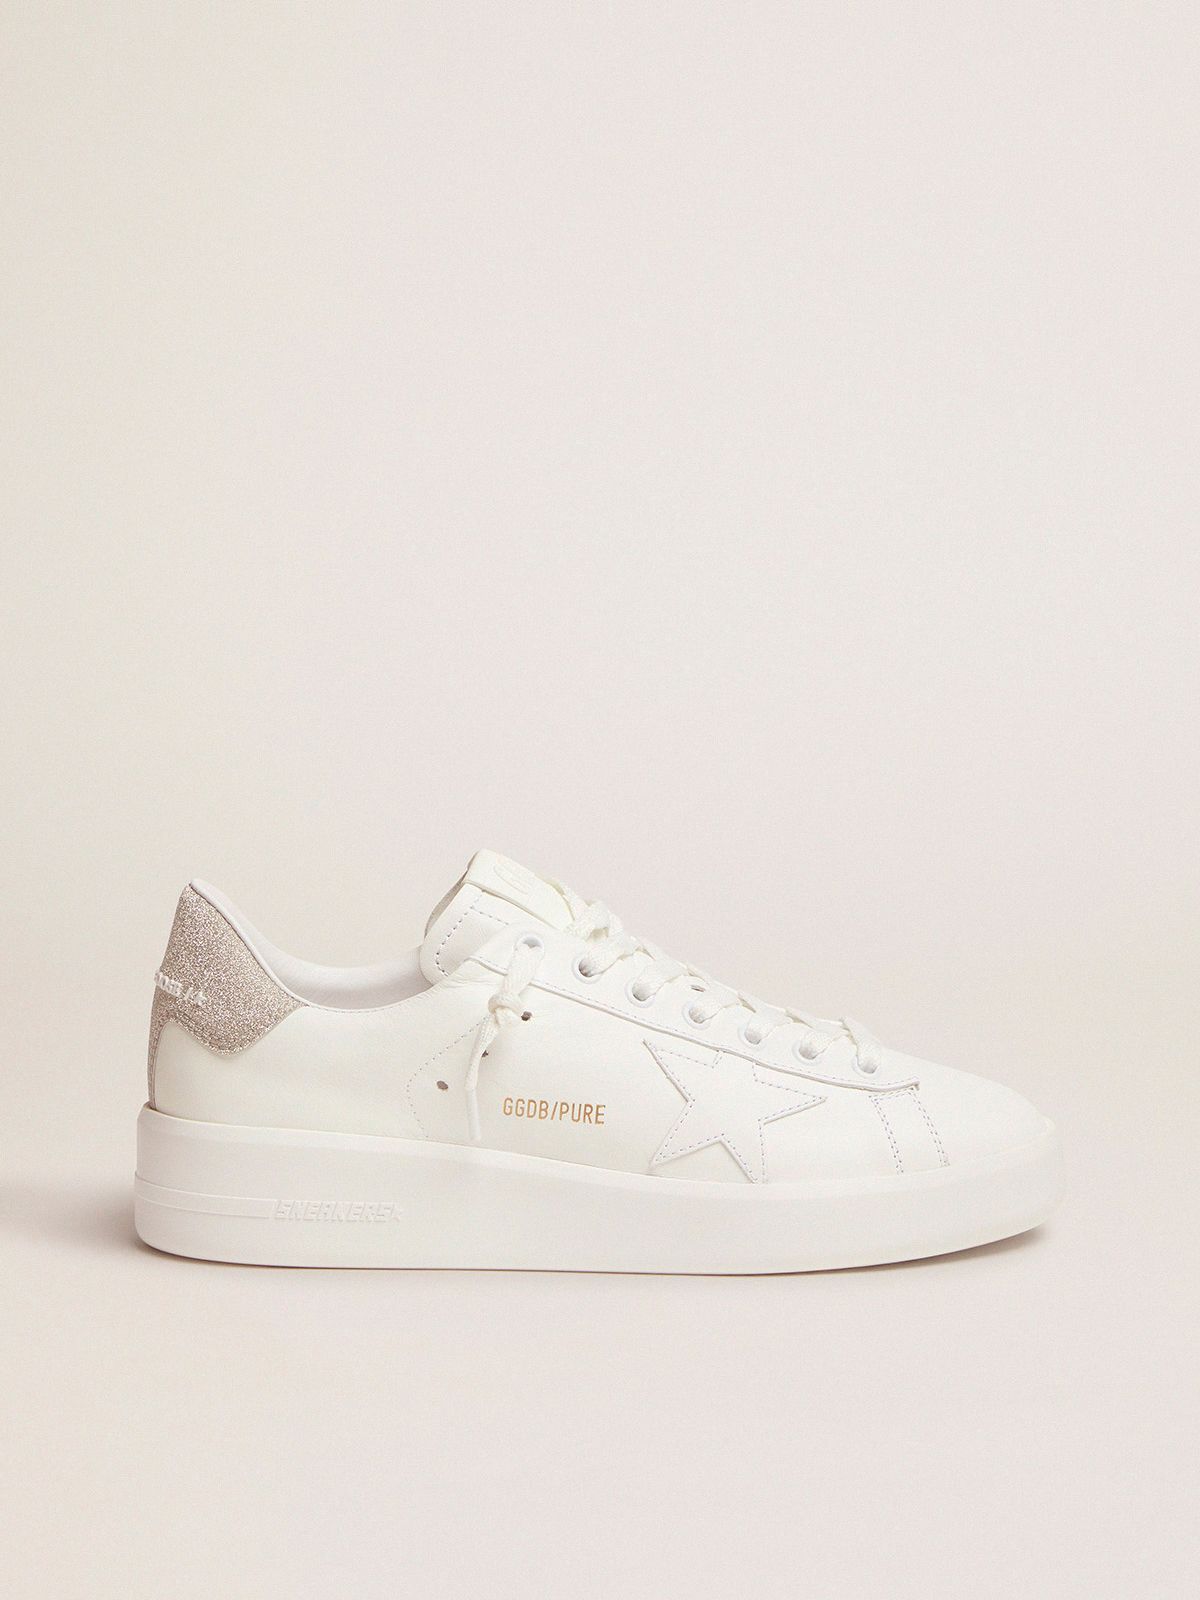 golden goose in champagne tab with leather heel white glitter sneakers Purestar